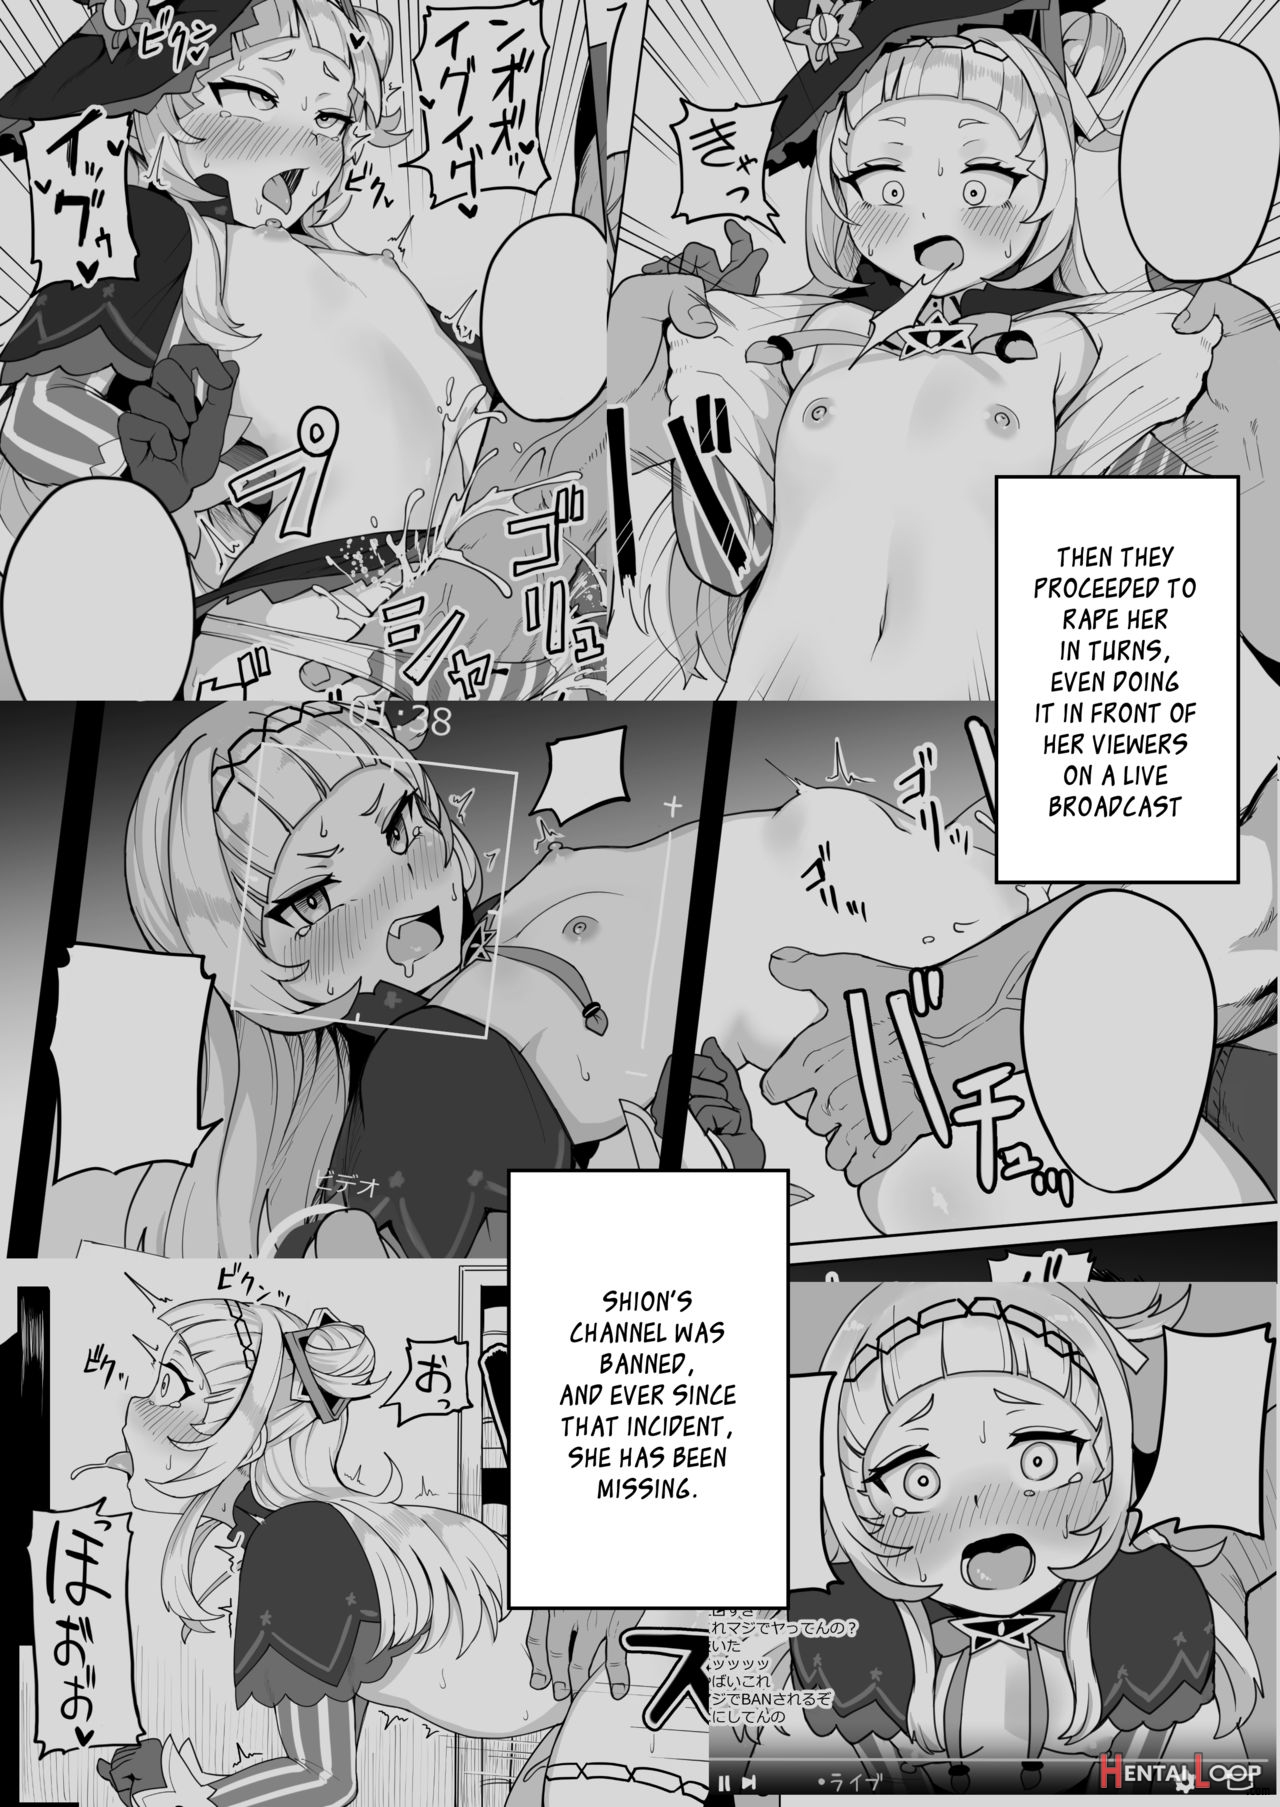 Aqua-chan, For Her Friend's Sake page 4